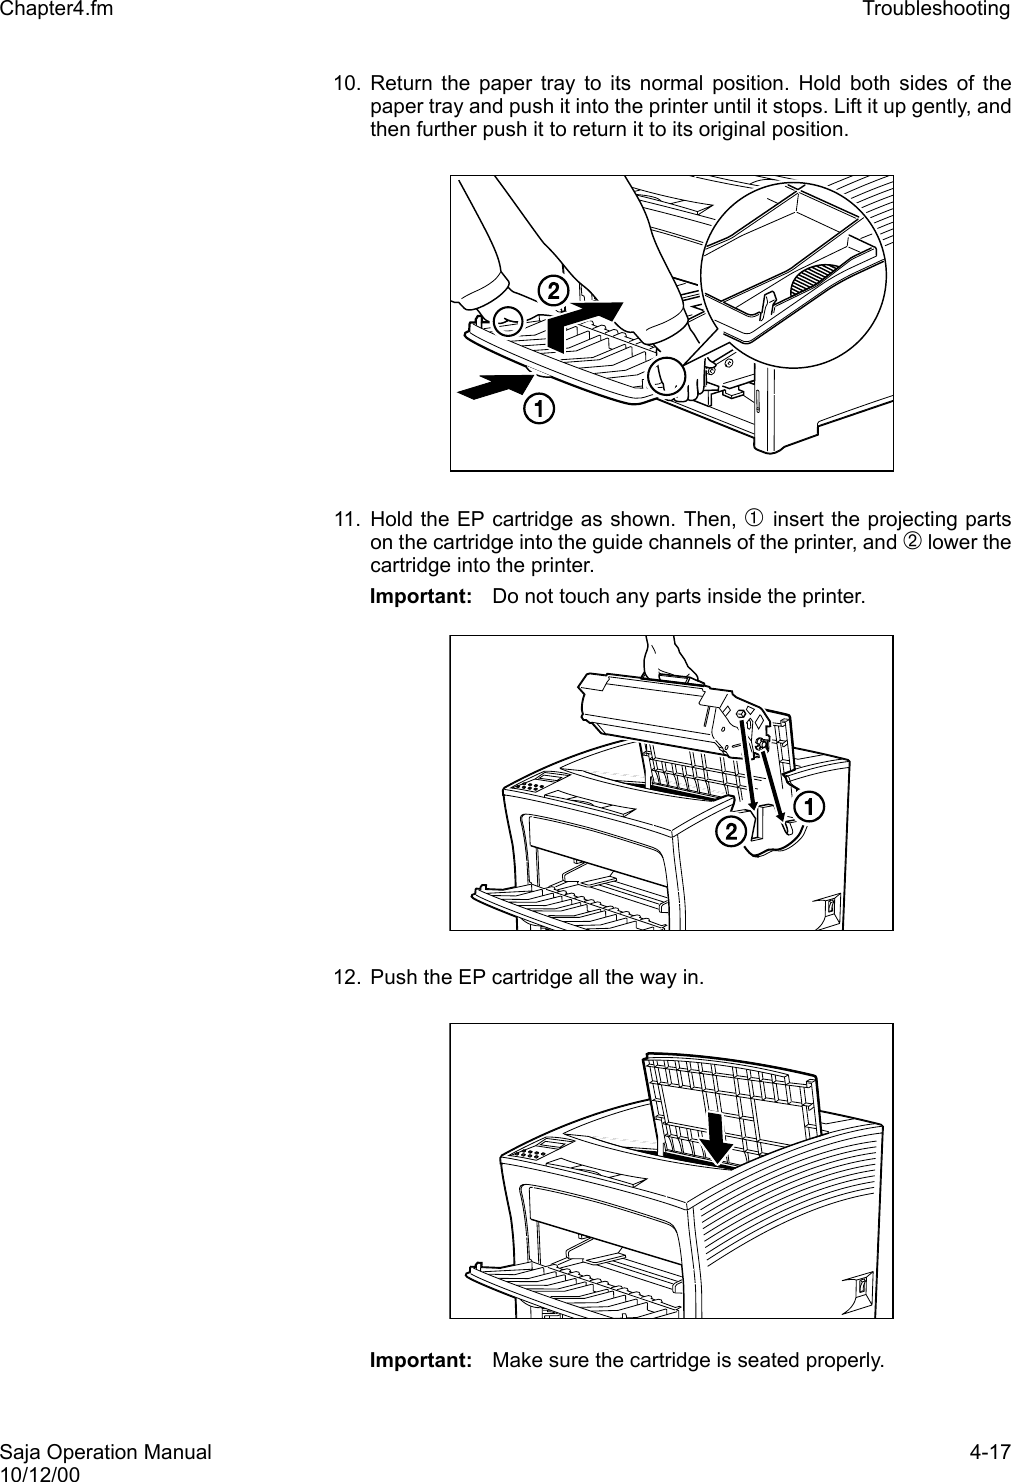 Saja Operation Manual 4-1710/12/00Chapter4.fm Troubleshooting 10. Return the paper tray to its normal position. Hold both sides of thepaper tray and push it into the printer until it stops. Lift it up gently, andthen further push it to return it to its original position.11. Hold the EP cartridge as shown. Then, ➀ insert the projecting partson the cartridge into the guide channels of the printer, and ➁ lower thecartridge into the printer. Important: Do not touch any parts inside the printer. 12. Push the EP cartridge all the way in. Important: Make sure the cartridge is seated properly. 